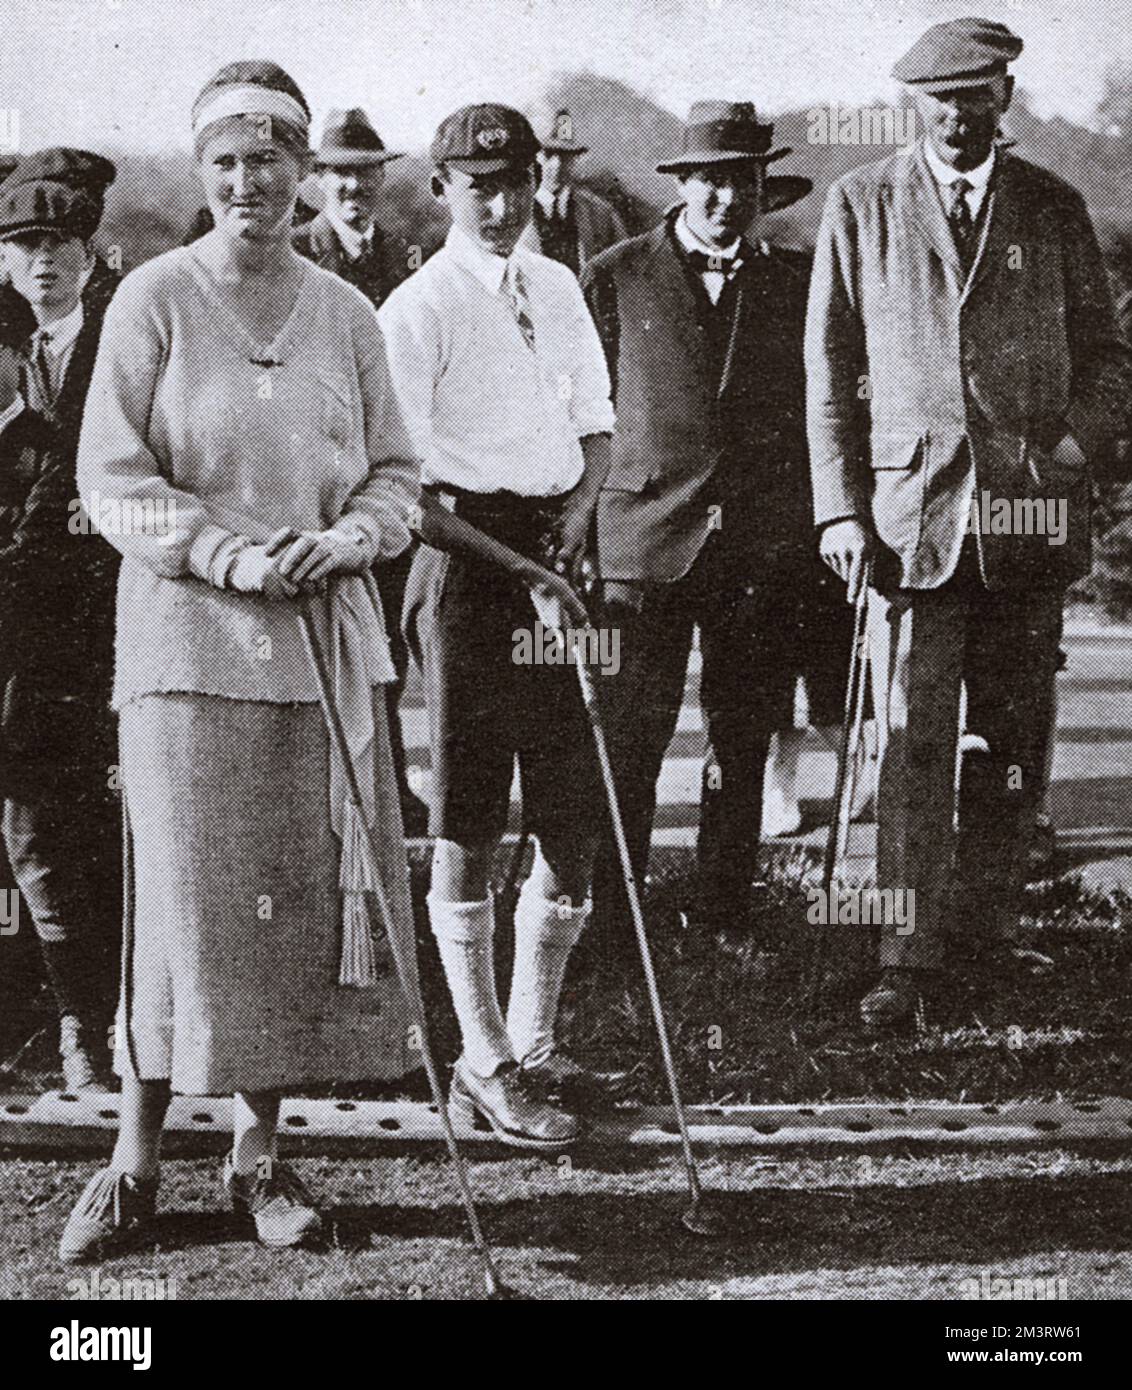 Miss Winifred Sarson and Master Donald Mathieson, competitors in the Boy and Girl Golf Championships at Walton Heath being watched by club professional James Braid.      Date: 1921 Stock Photo